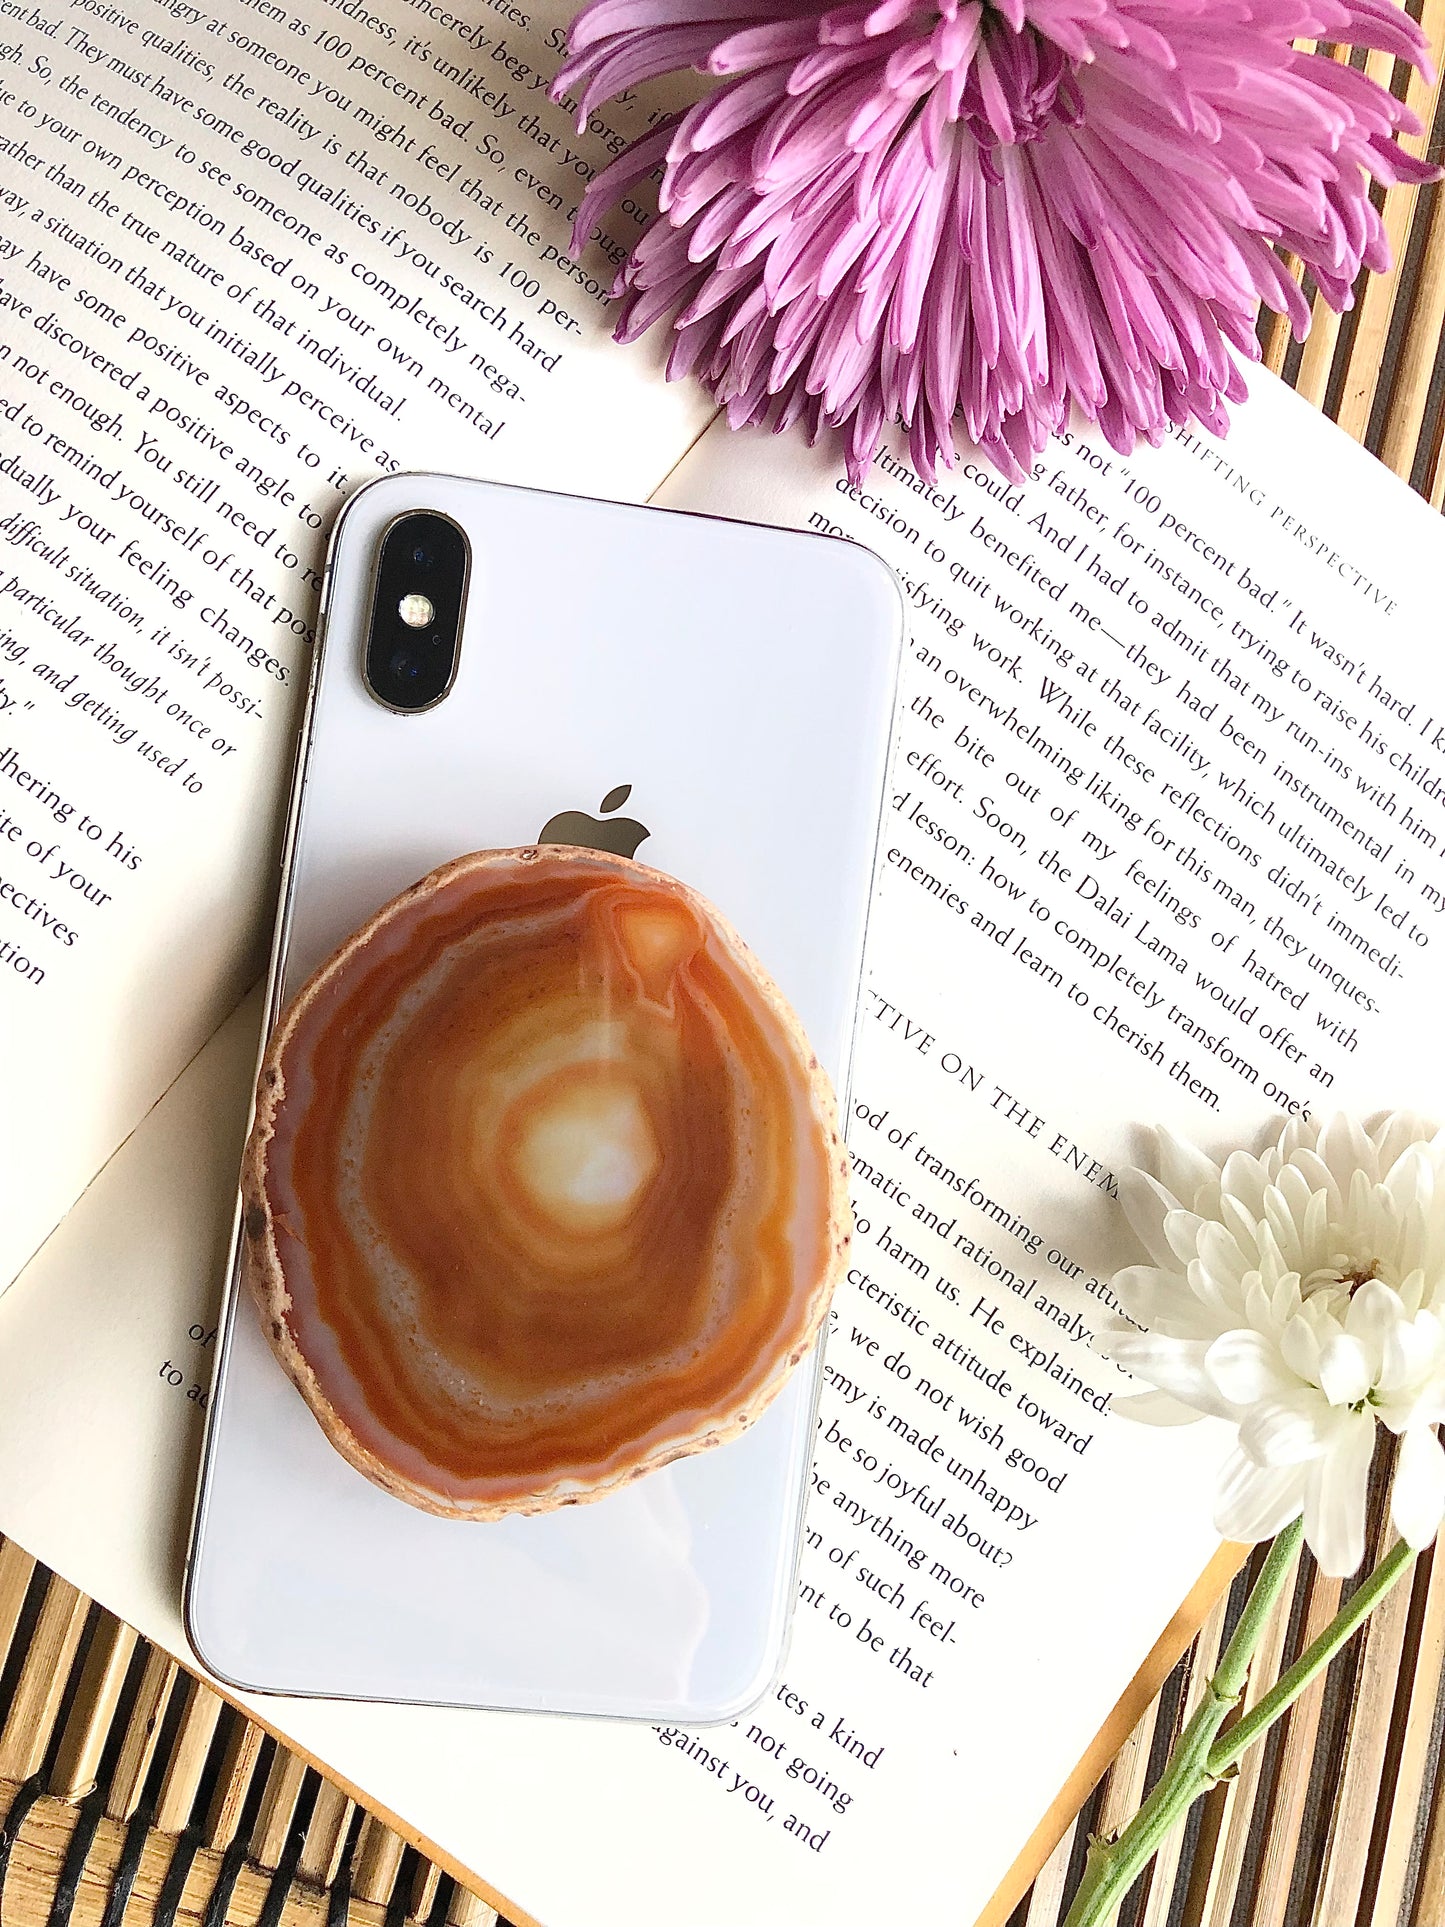 Natural agate phone grip presented on iPhone 8, laying on top of open book, framed by for and yellow flowers